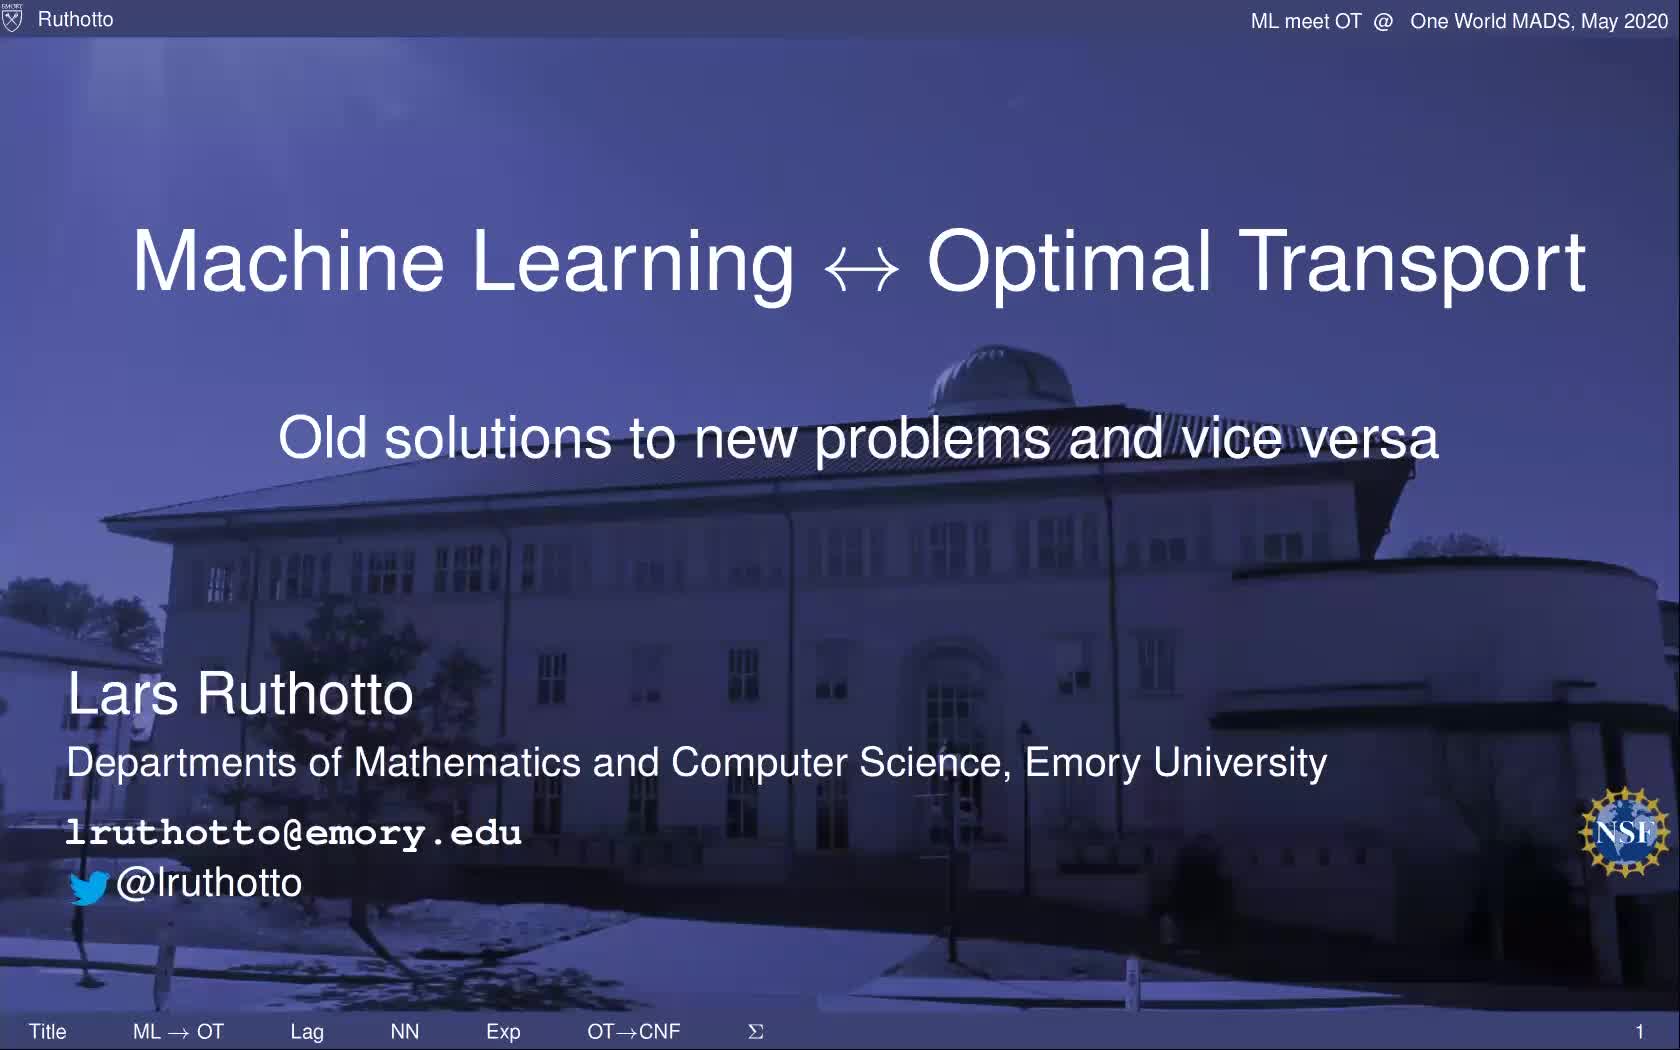 Lars Ruthotto: Machine Learning meets Optimal Transport: Old solutions for new problems and vice versa preview image